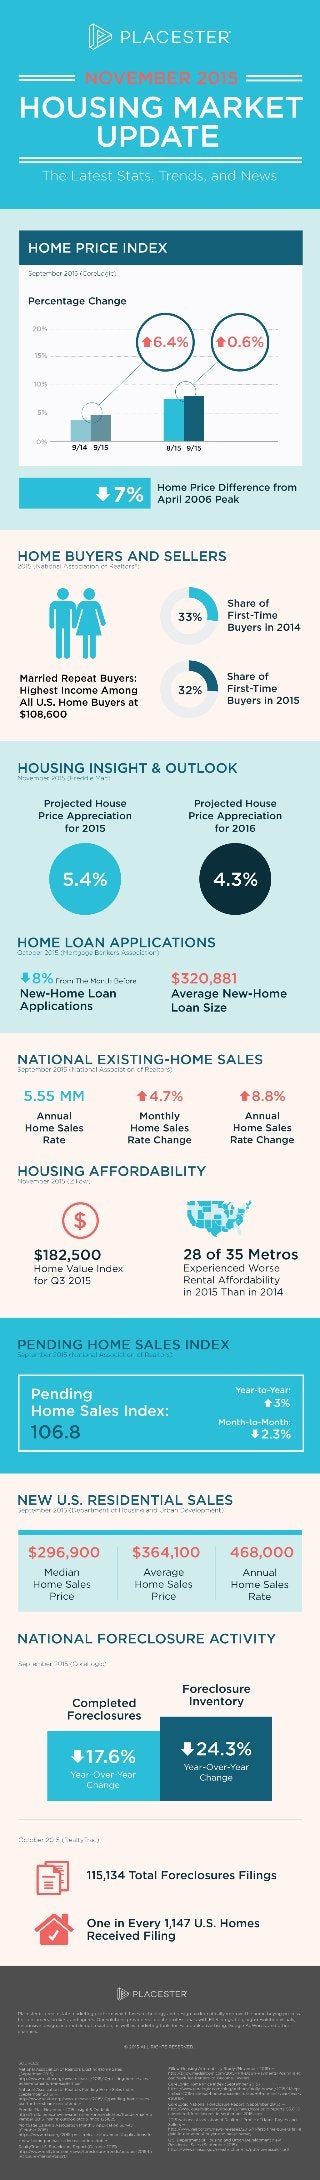 November 2015 Real Estate Statistics: End-of-Year Housing Market Trends [Infographic]